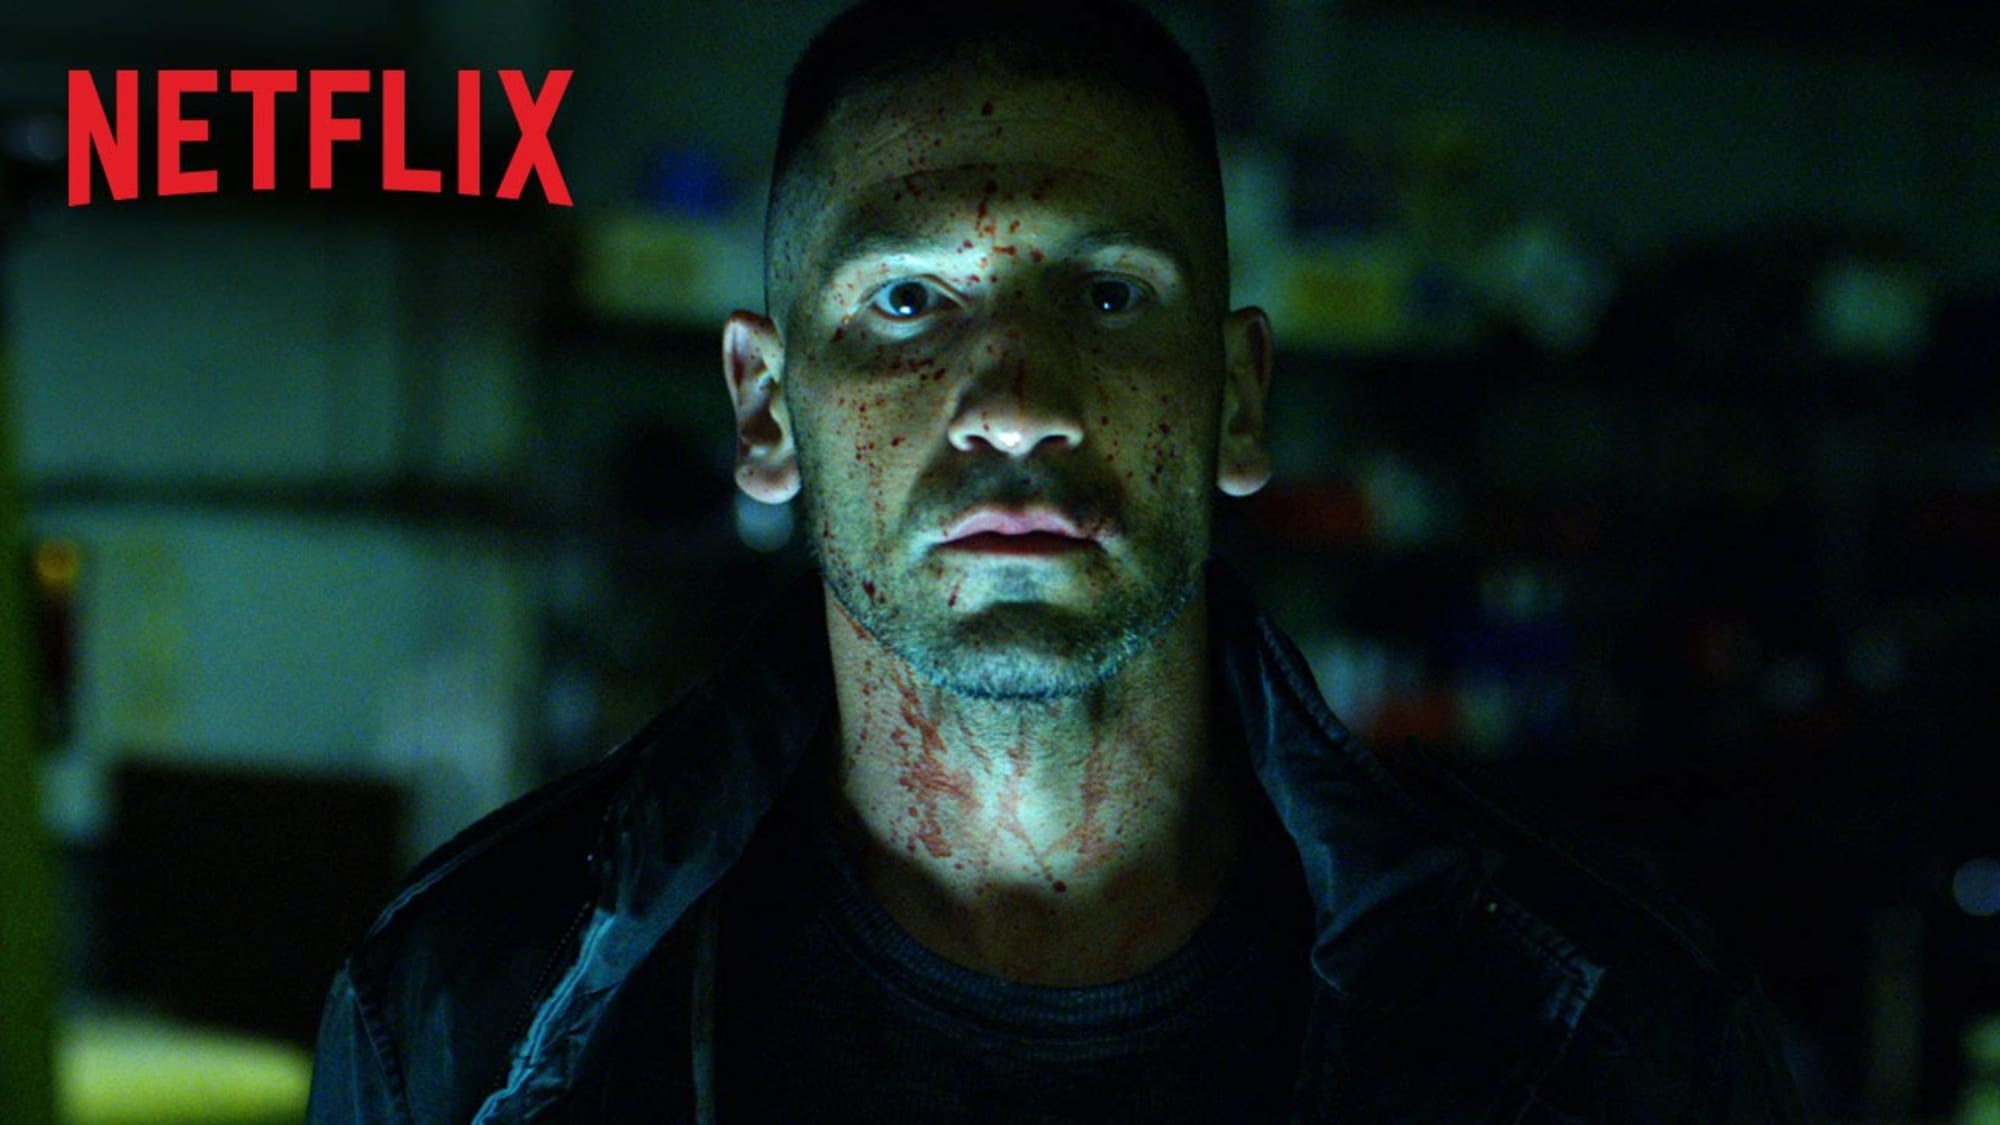 The Punisher Marvel, Netflix order a spinoff series